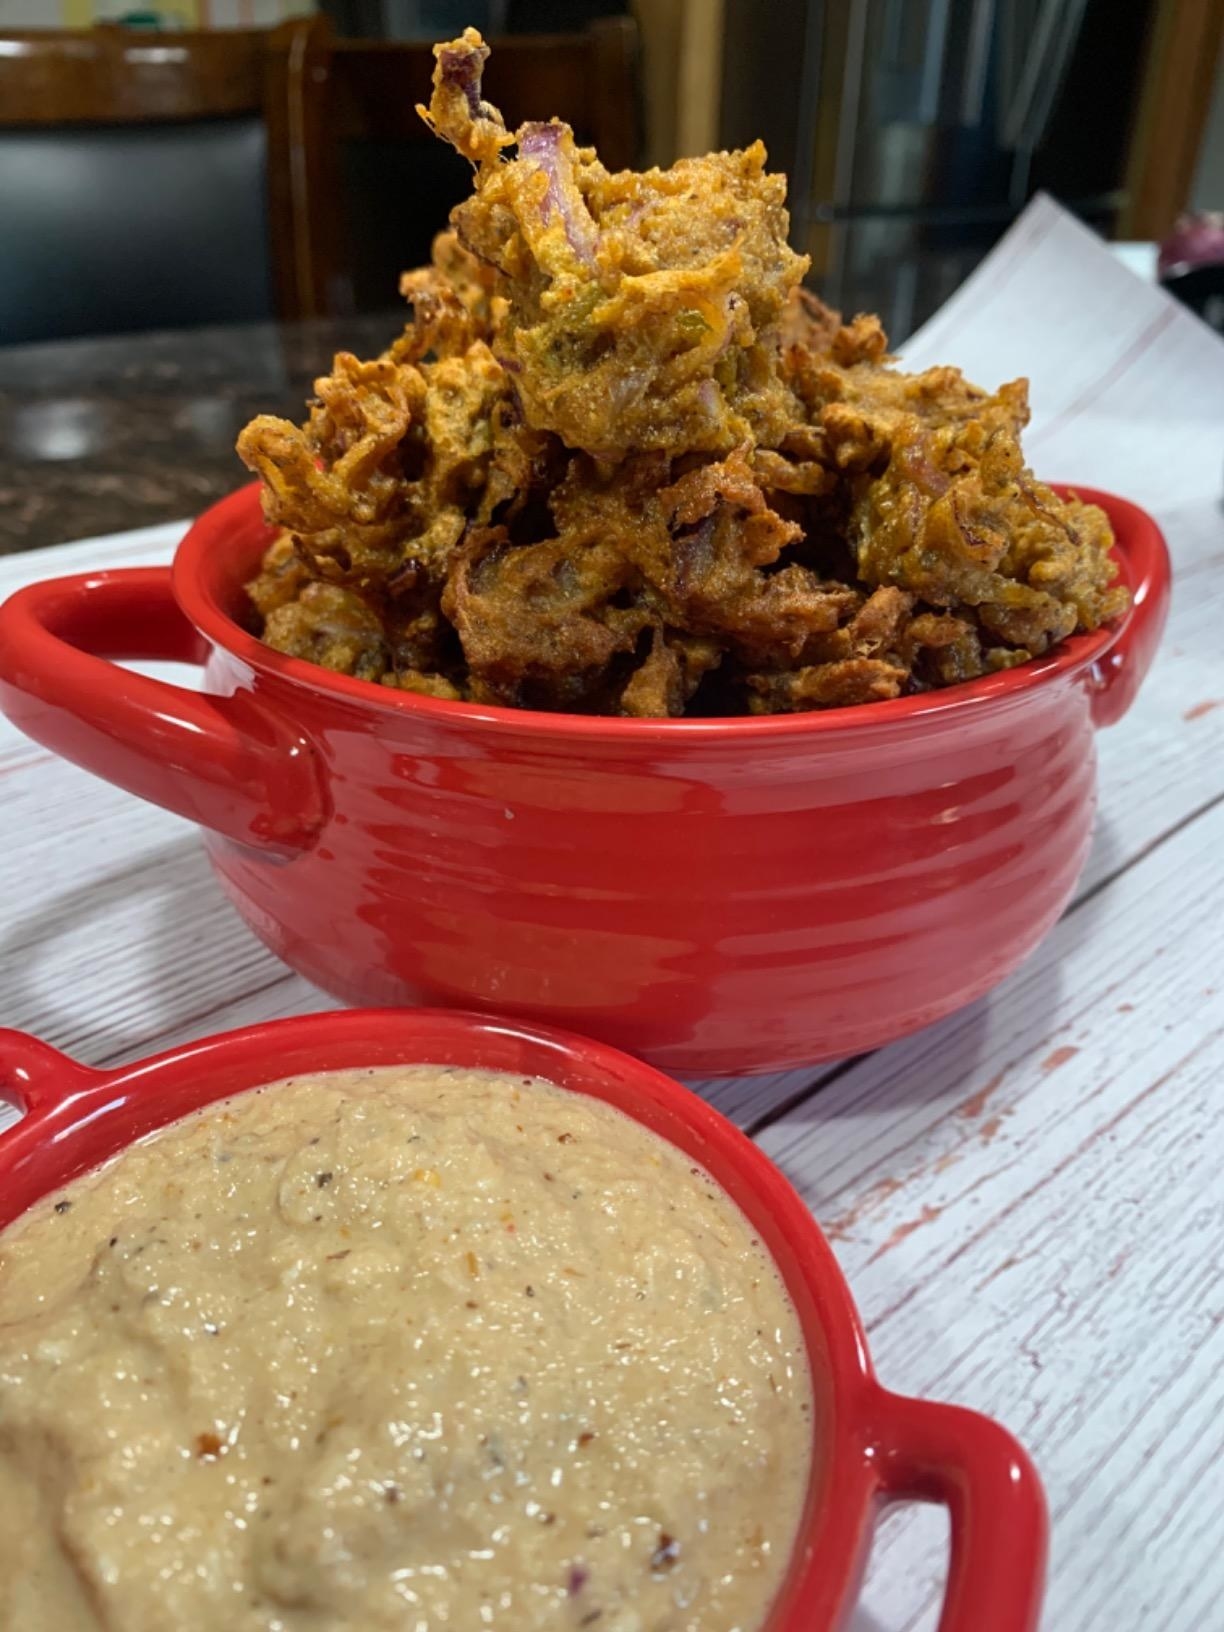 reviewer image of a red cutiset ceramic bowl full of a fried onion stack